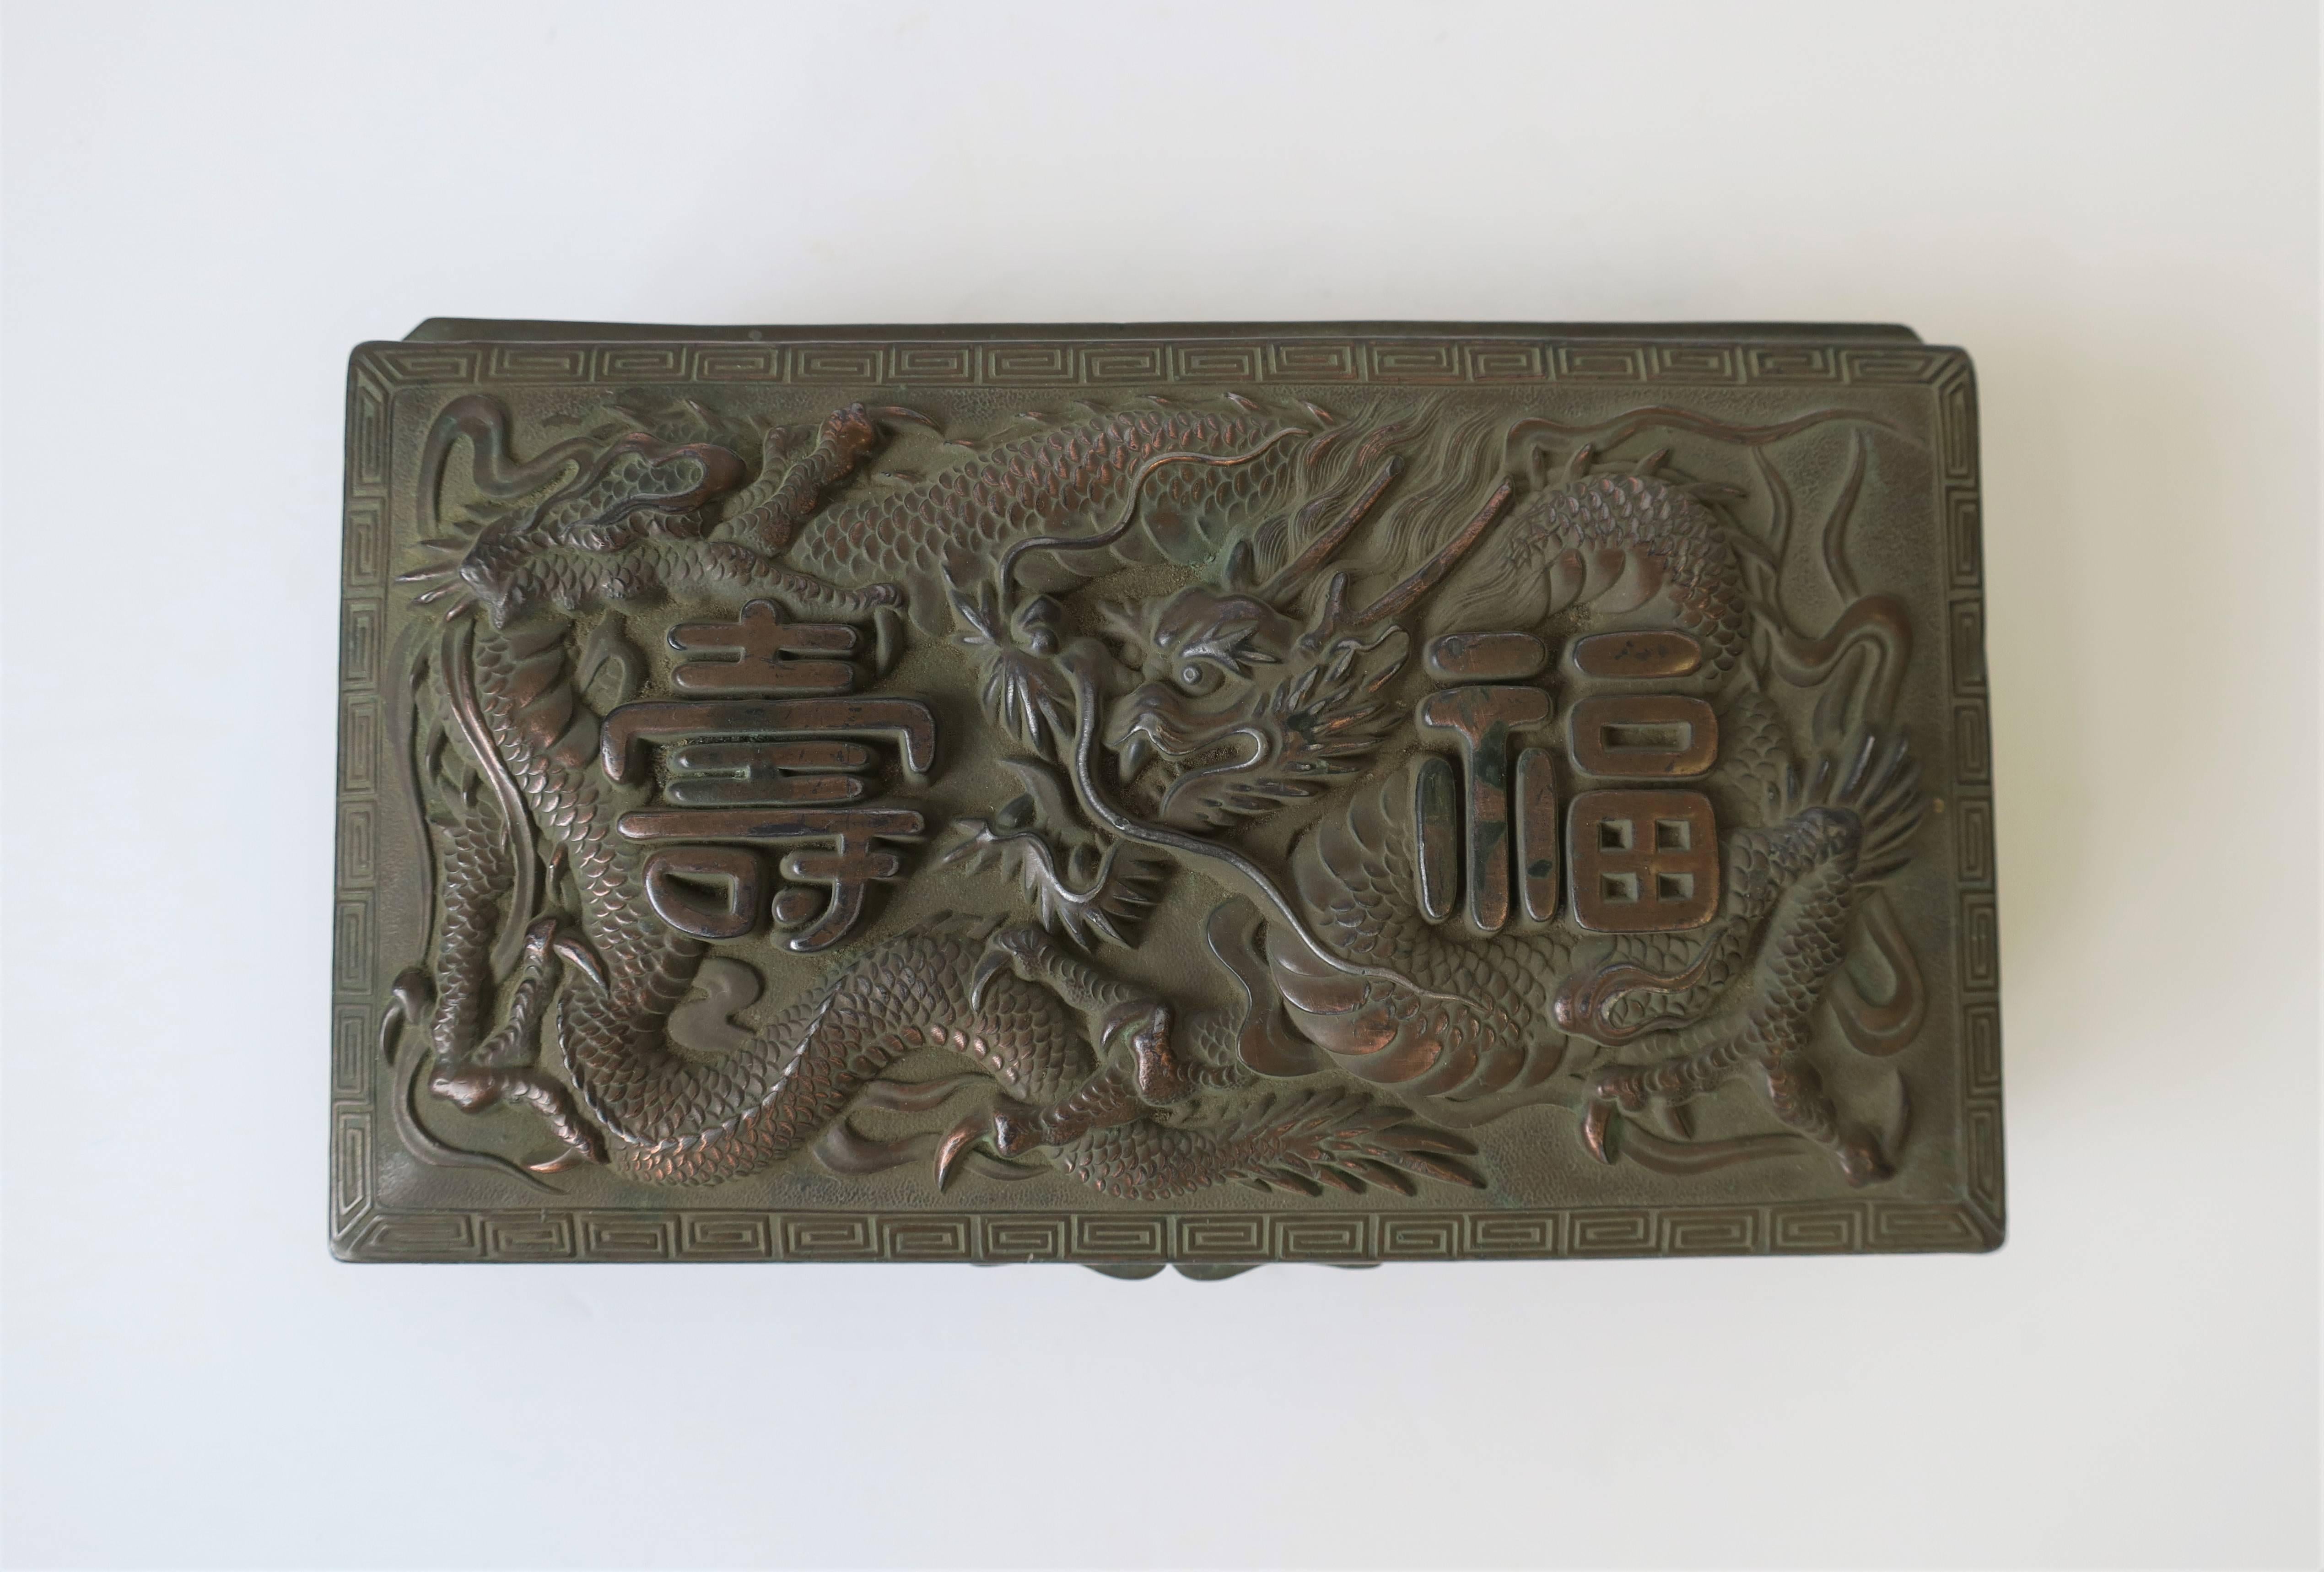 A beautiful and substantial copper metal Japanese box with elaborate raised, debossed or 'repousse' design: elaborate dragon, Japanese writing, Greek Key-like detail on top edge, and mum flowers on sides. Early 20th century Japan, circa 1940s WWII